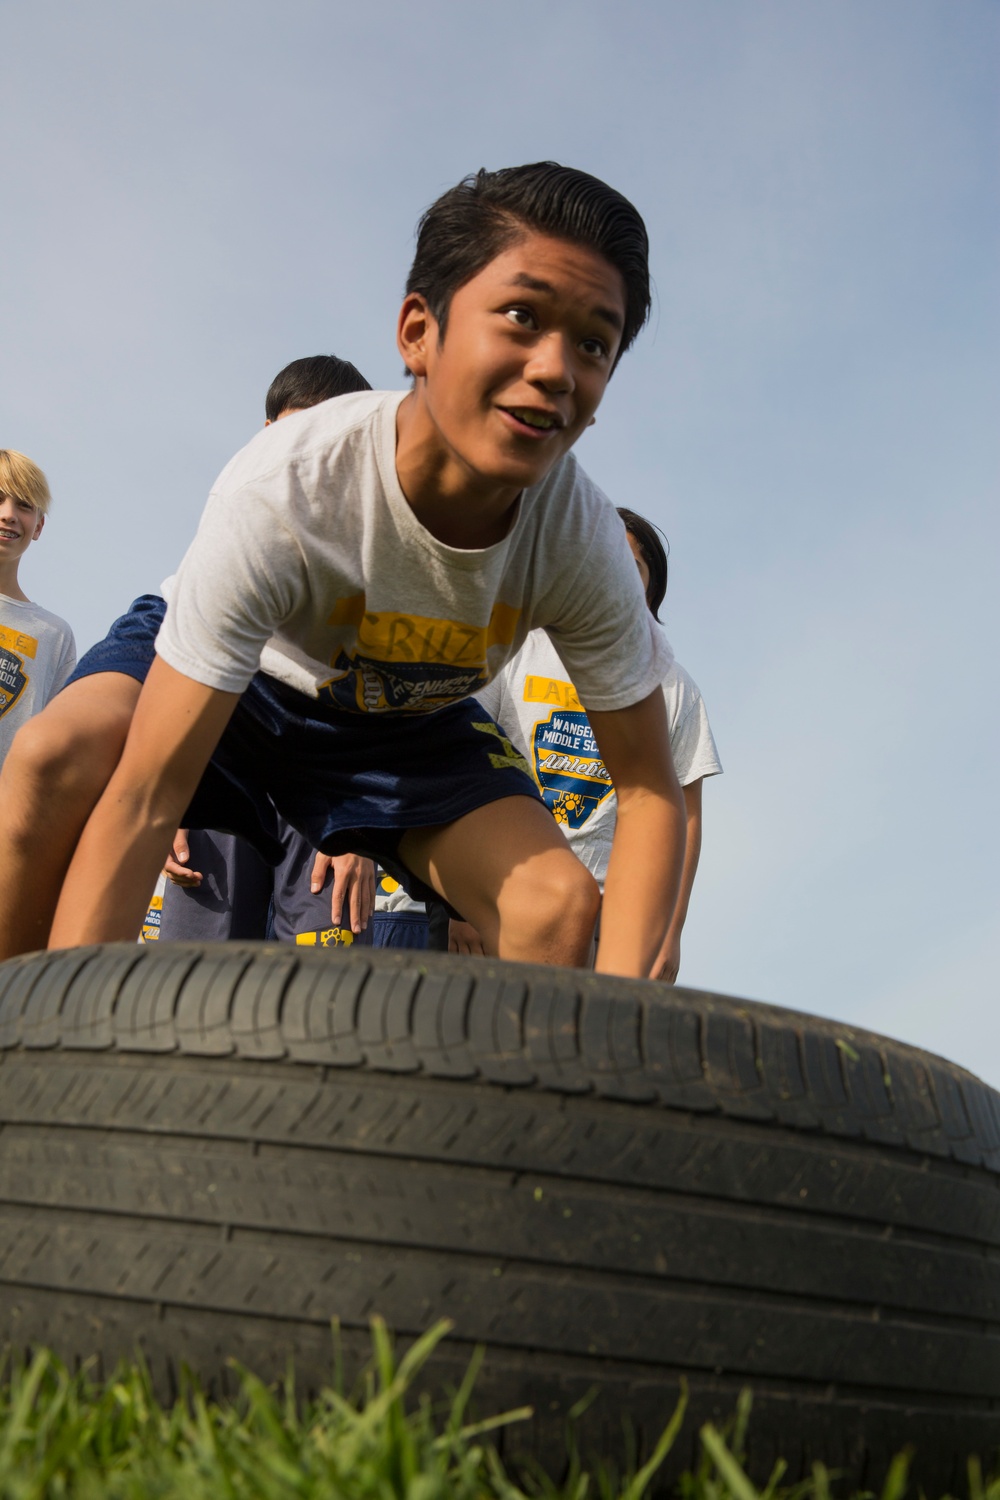 Exercise your mind and body: MCAS Miramar Marines host 1st annual fitness challenge